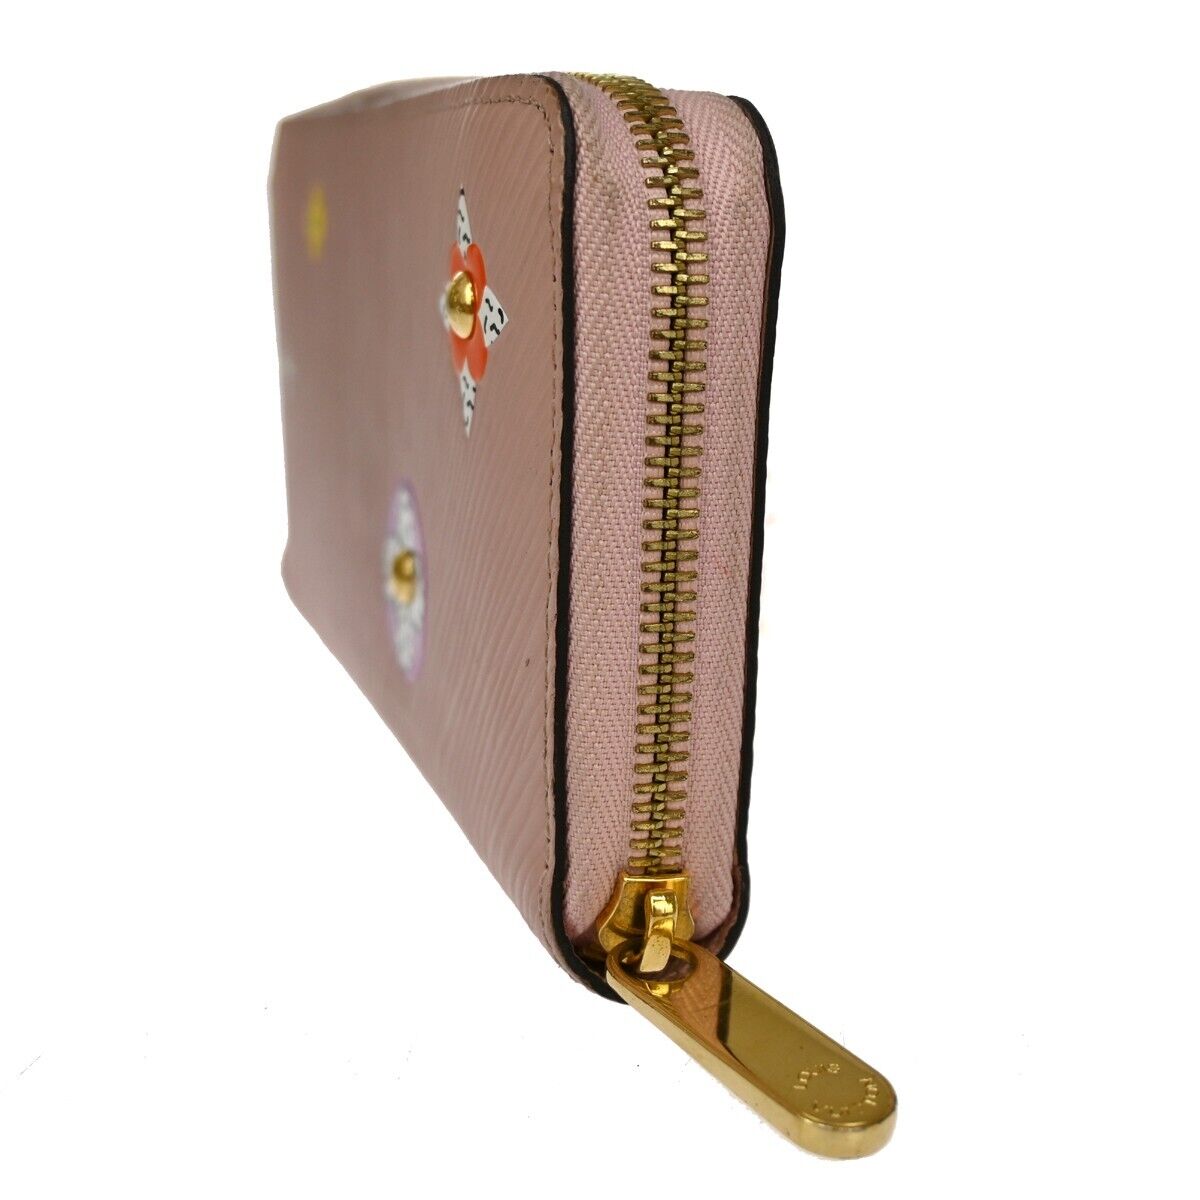 Pre-owned Louis Vuitton Zippy Wallet Pink Leather Wallet  ()